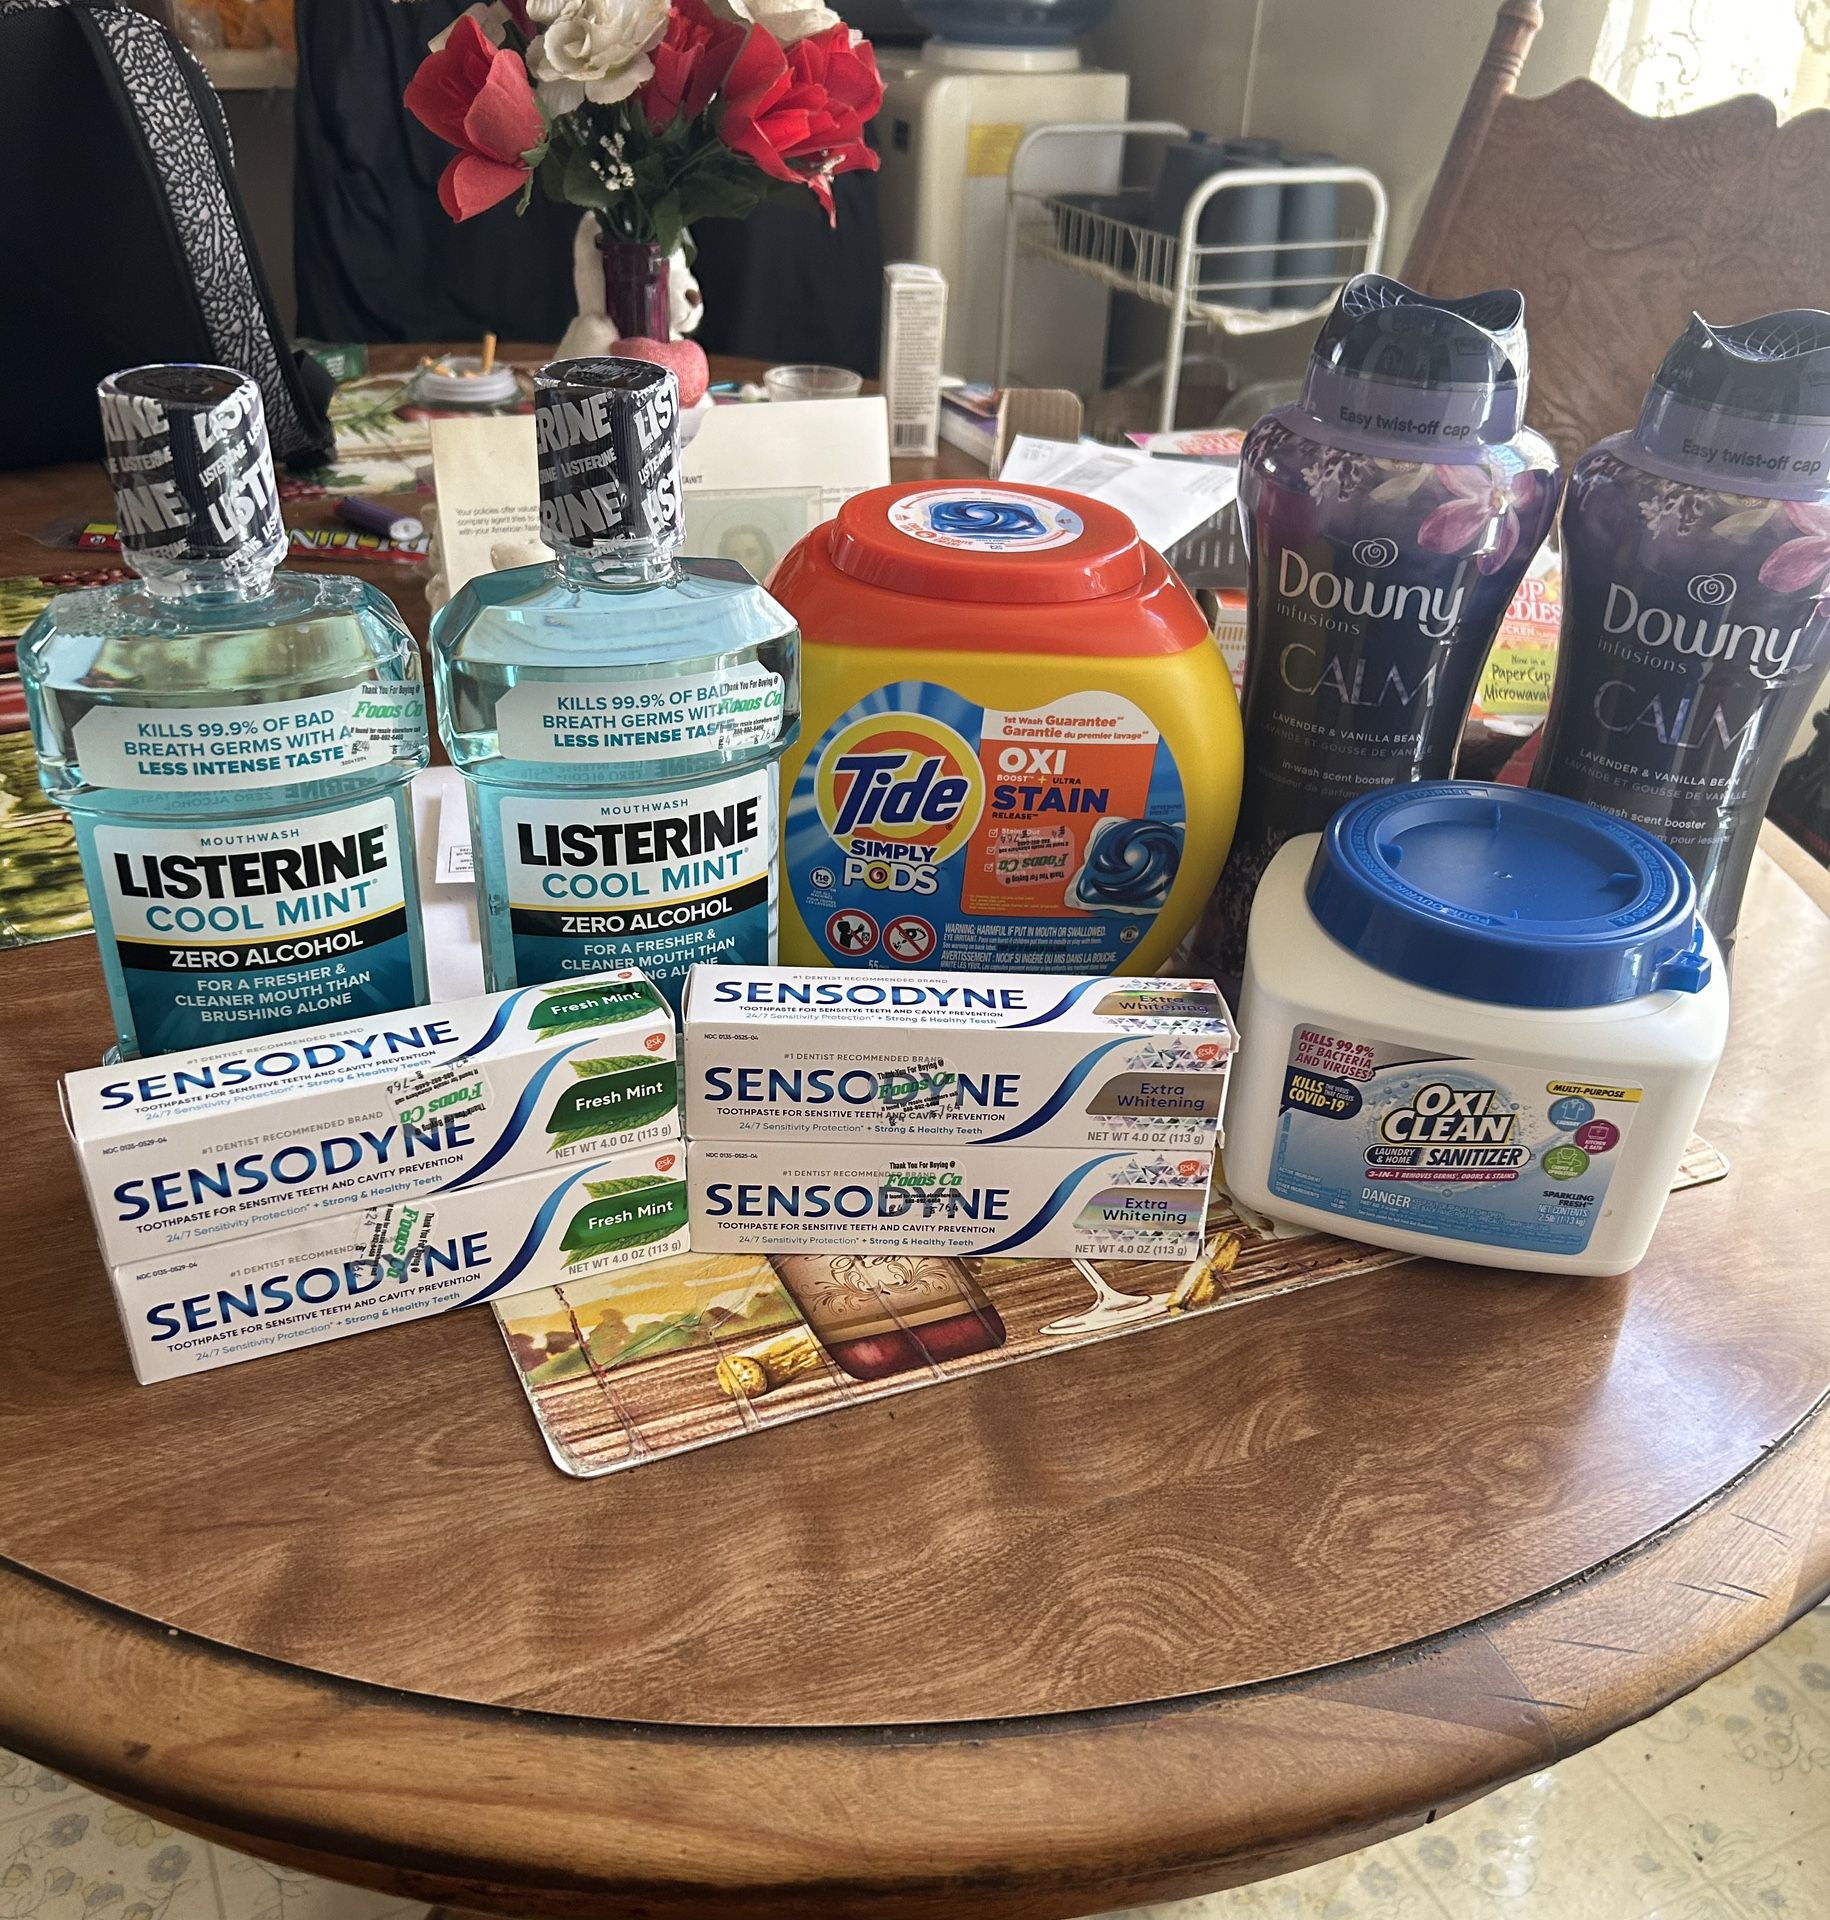 Listerine Mouthwash, Toothpaste, Tide Pods, Downy Scentbeads, OxiClean Sanitizer 